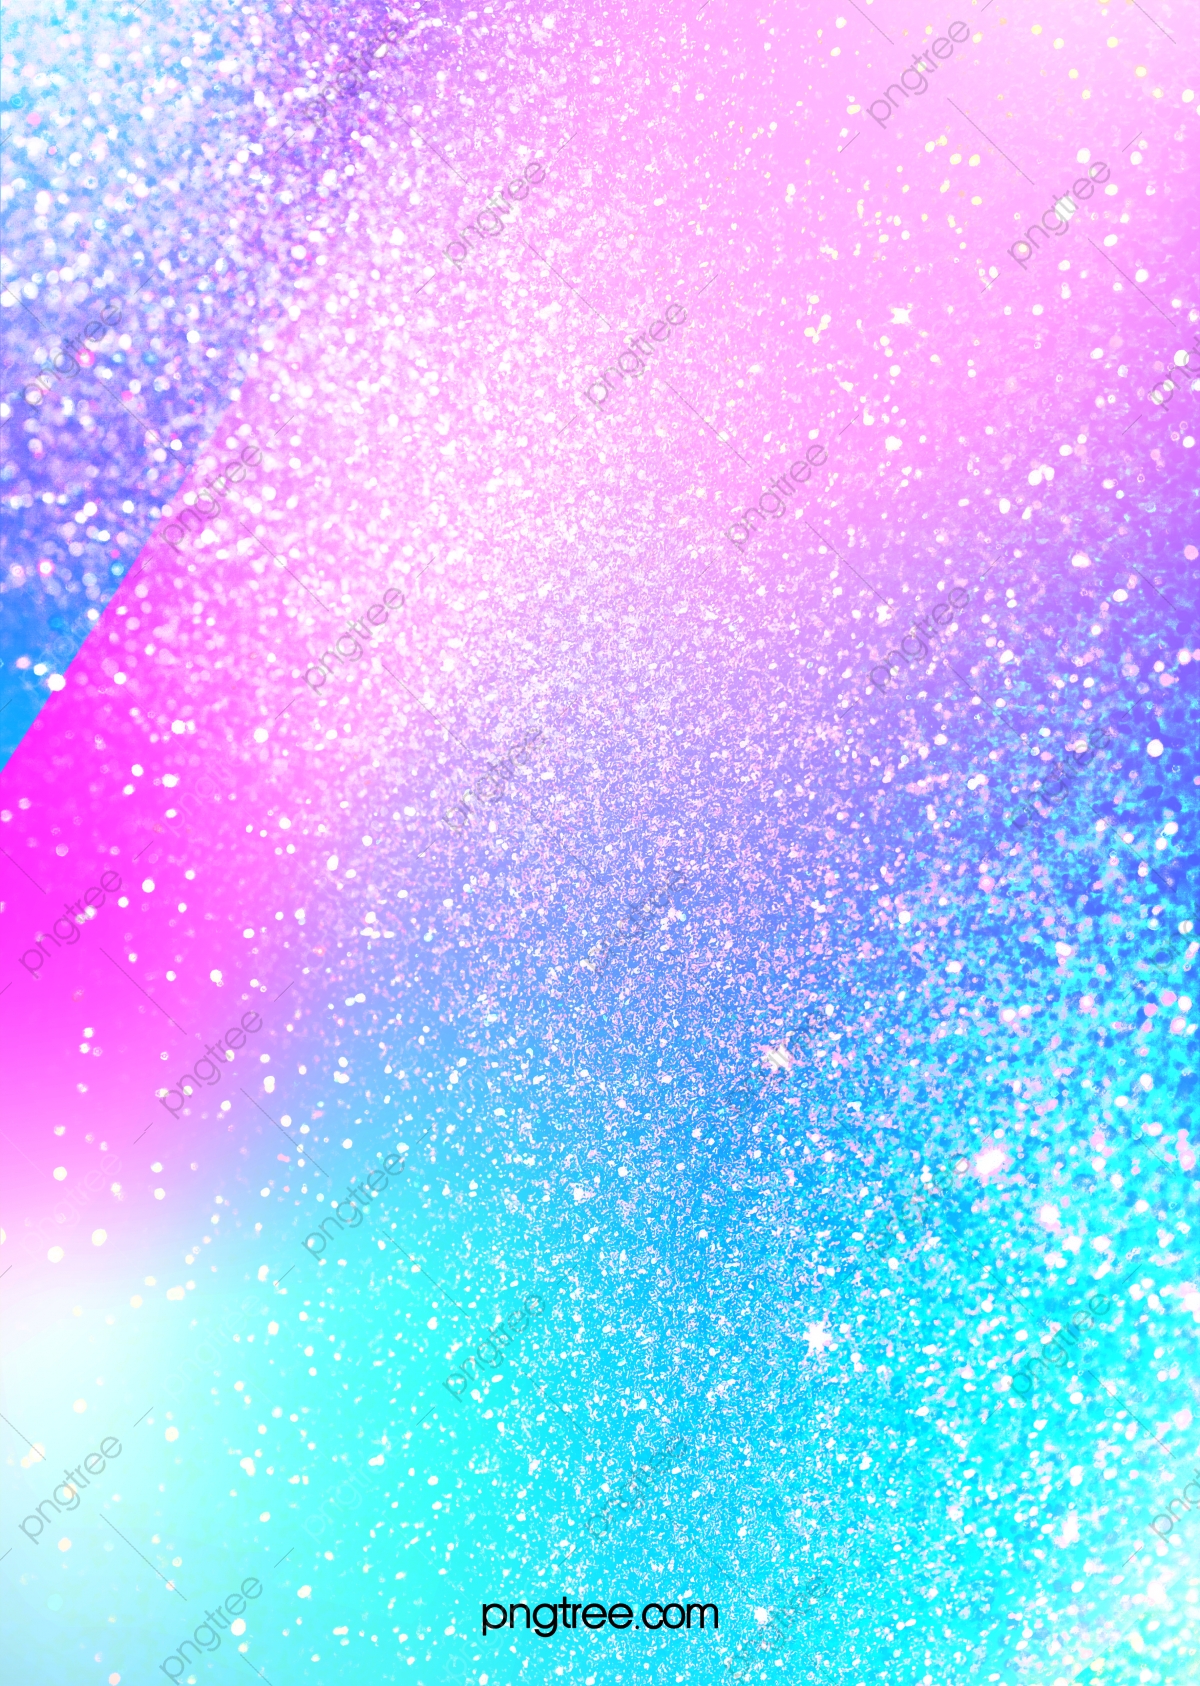 Holographic Iphone Wallpapers